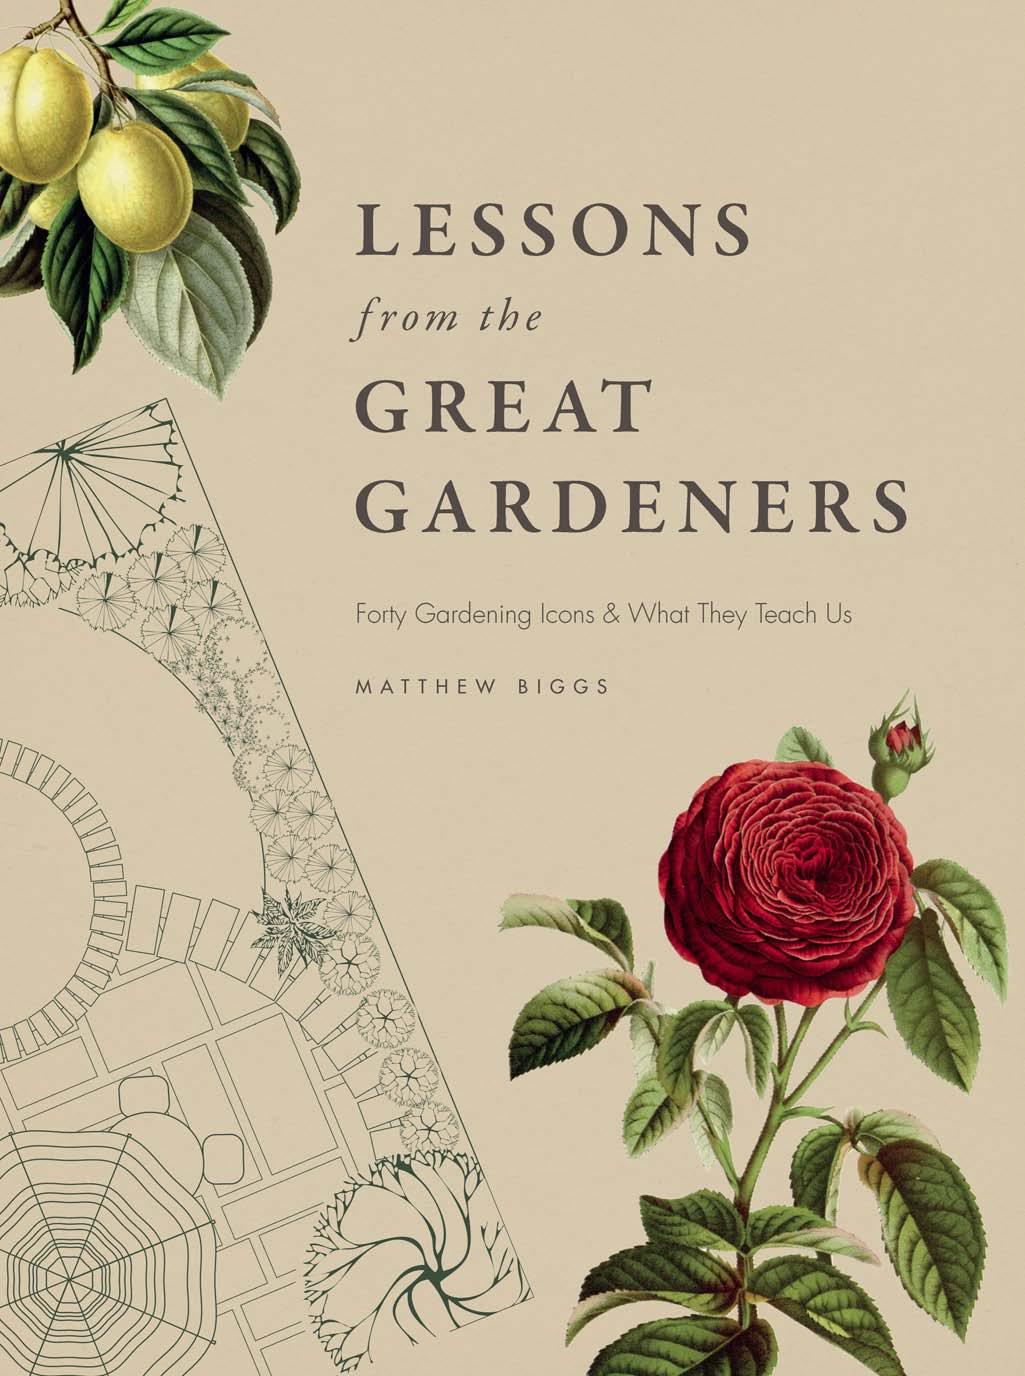 Lessons from the Great Gardeners: Forty Gardening Icons and What They Teach Us by Matthew Biggs